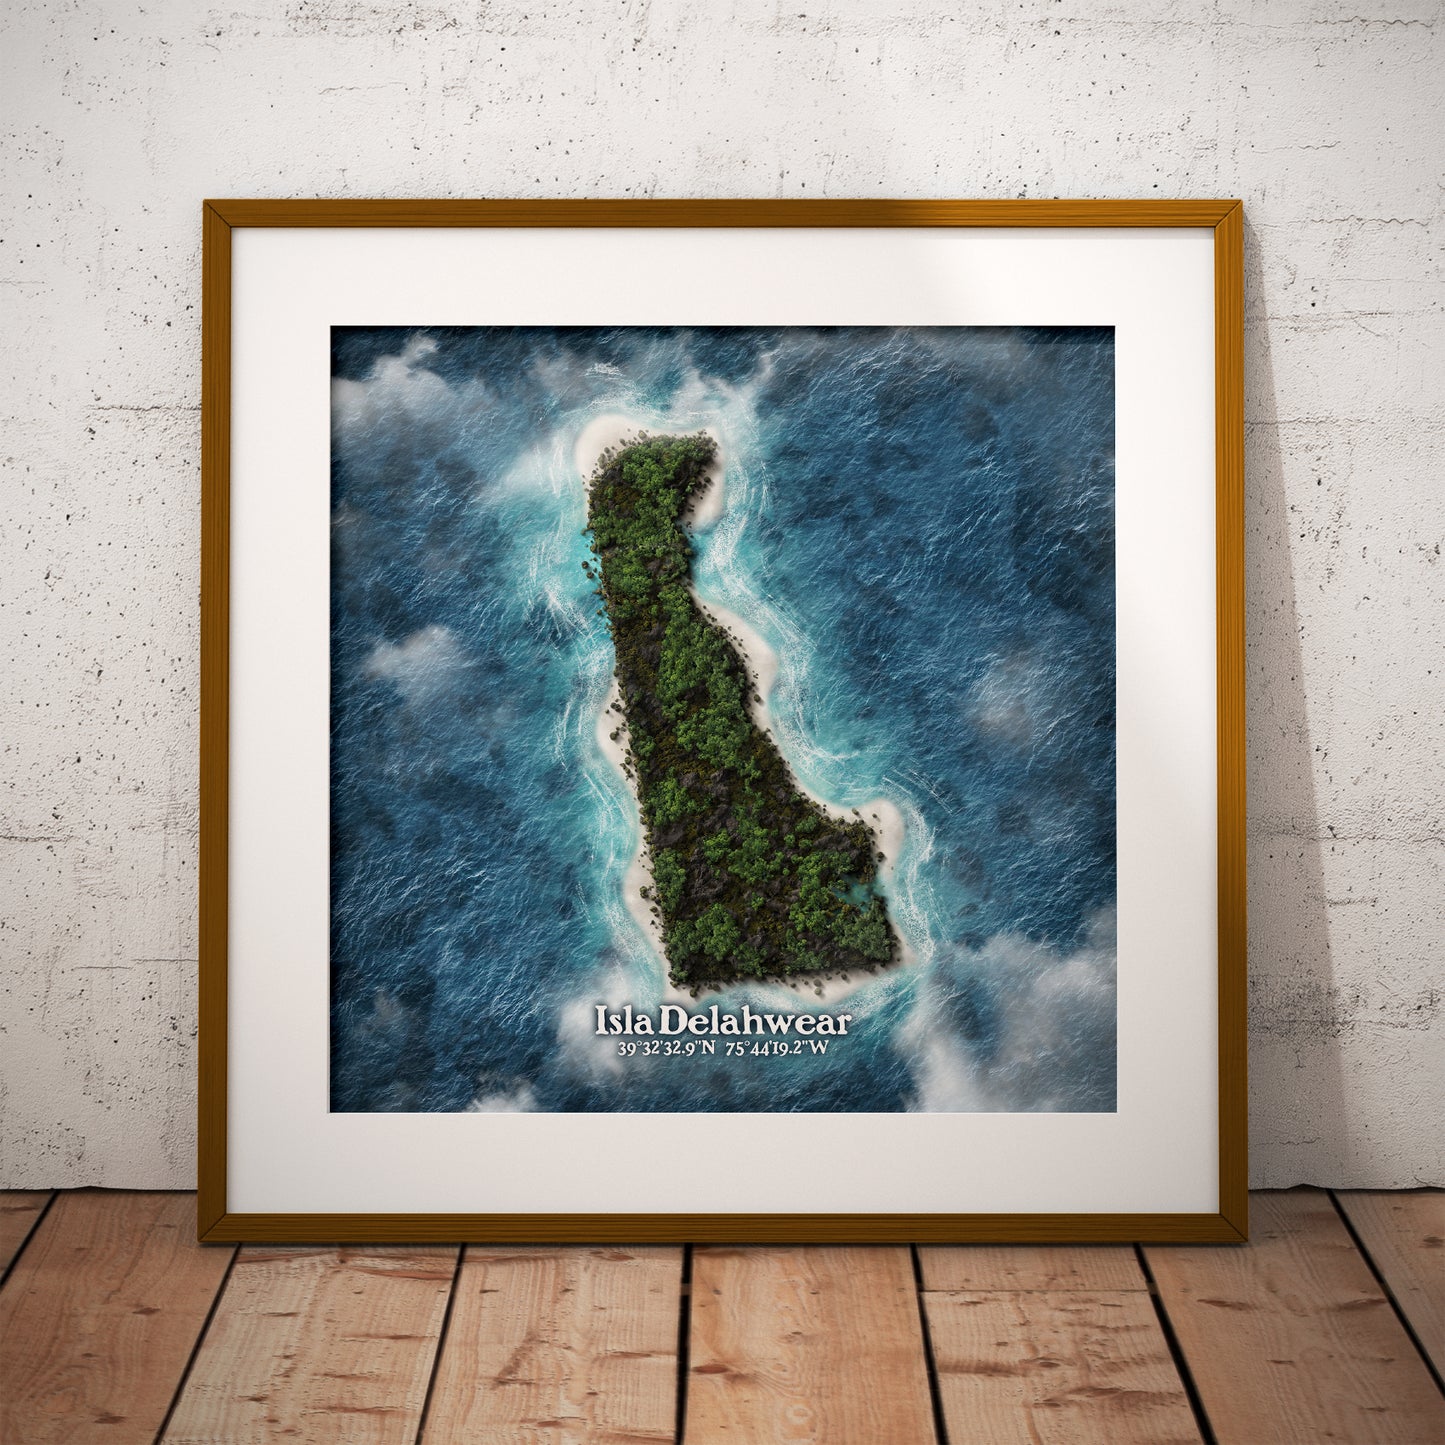 Delaware state as an island print (Delahwear). Novelty art - Imagine your state as an island.